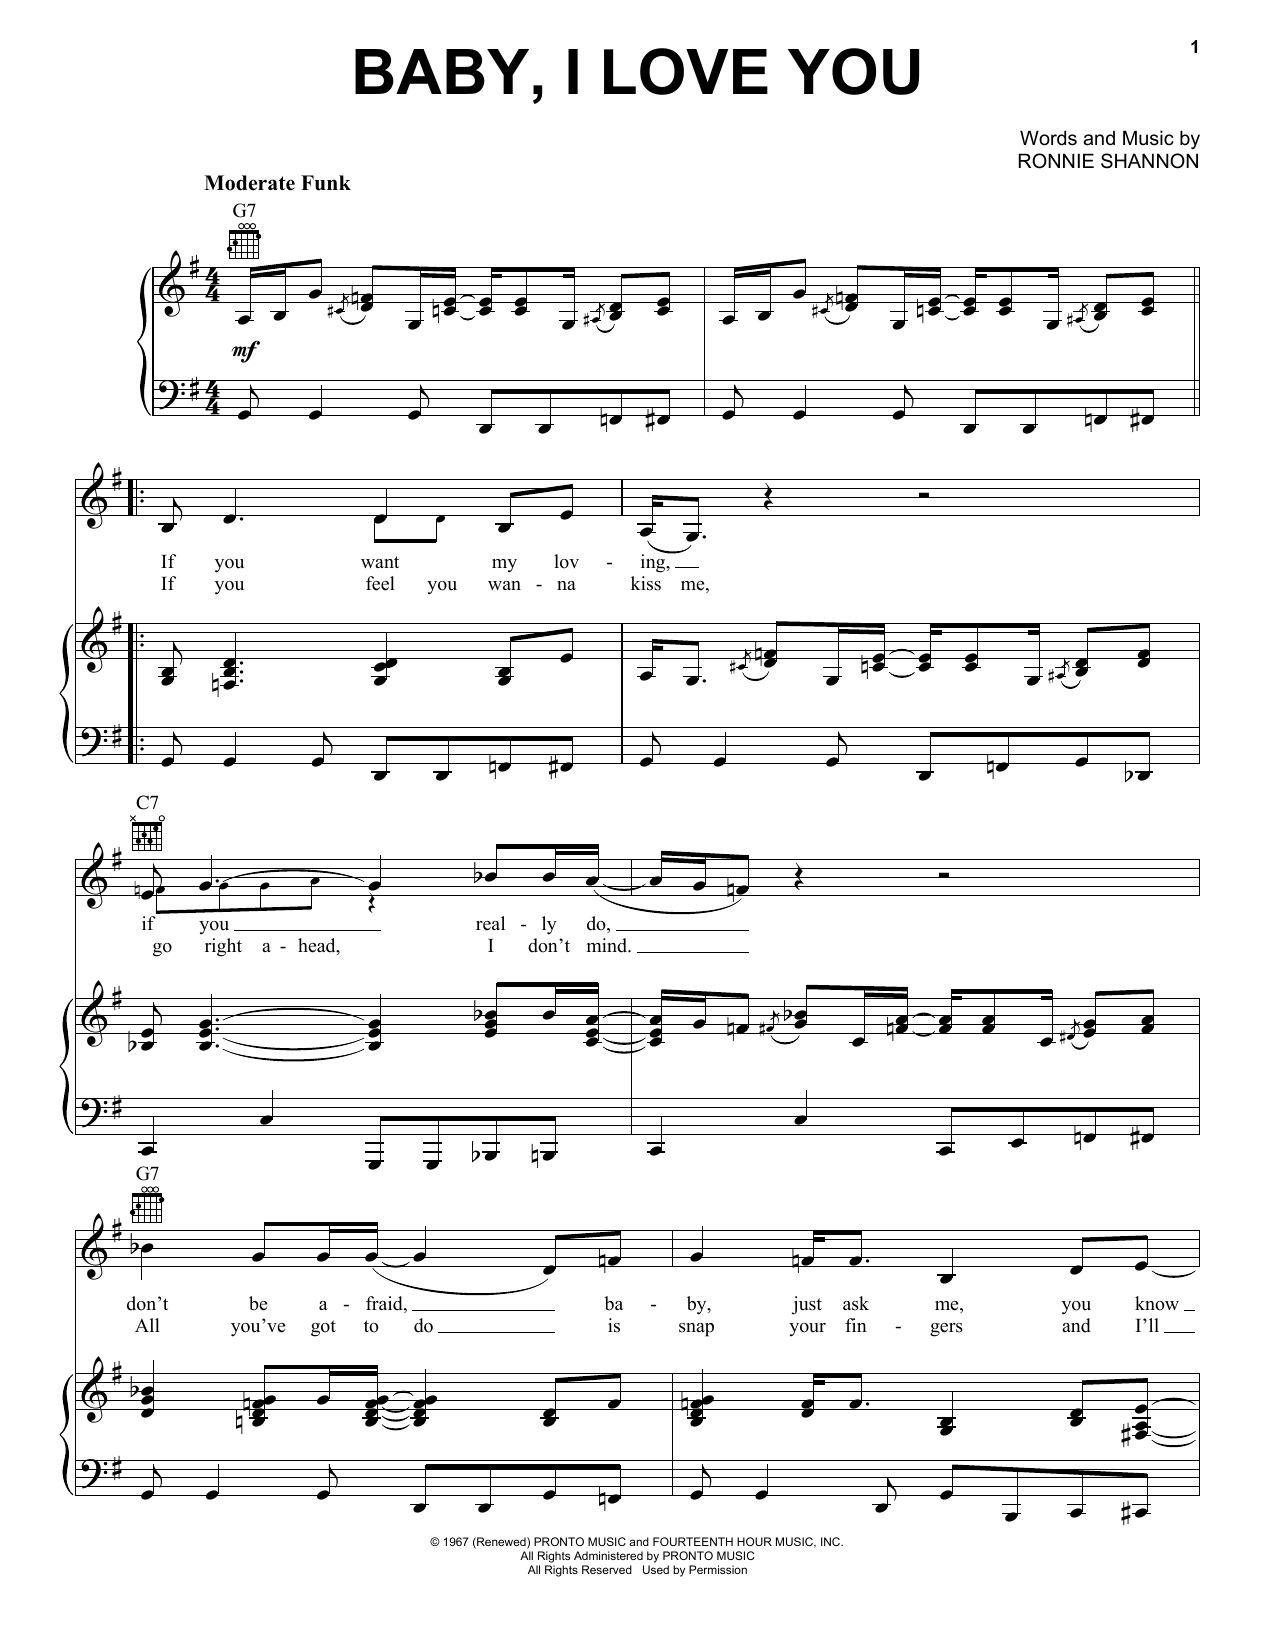 Award Interconnect delinquency Aretha Franklin "Baby, I Love You" Sheet Music PDF Notes, Chords | Pop  Score Piano, Vocal & Guitar (Right-Hand Melody) Download Printable. SKU:  158295